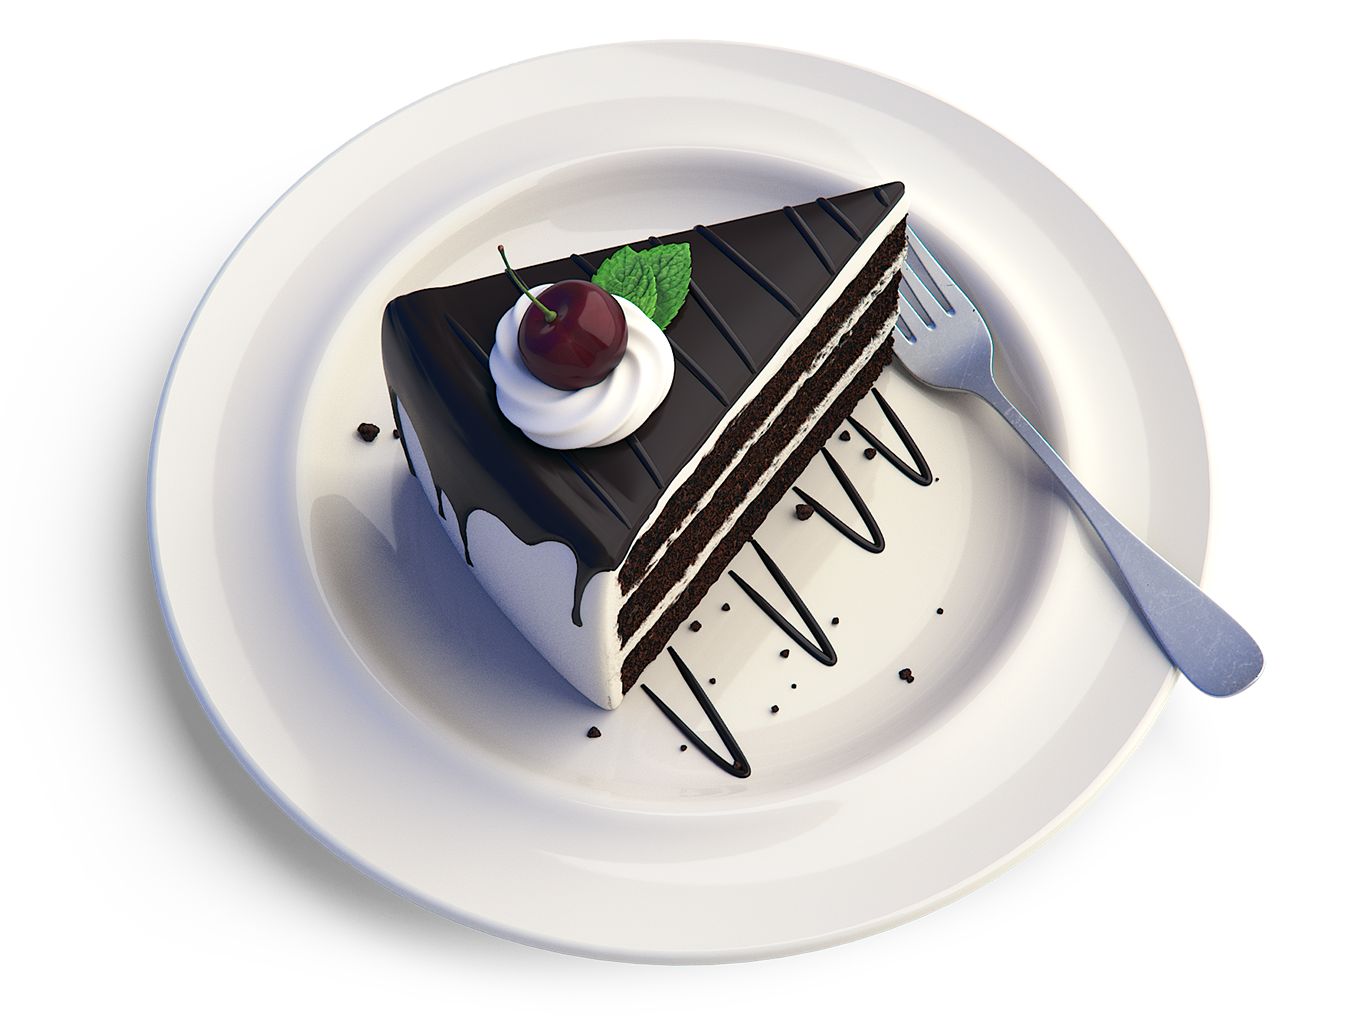 A slice of cake to represent that you can, in fact, have your cake and eat it too.